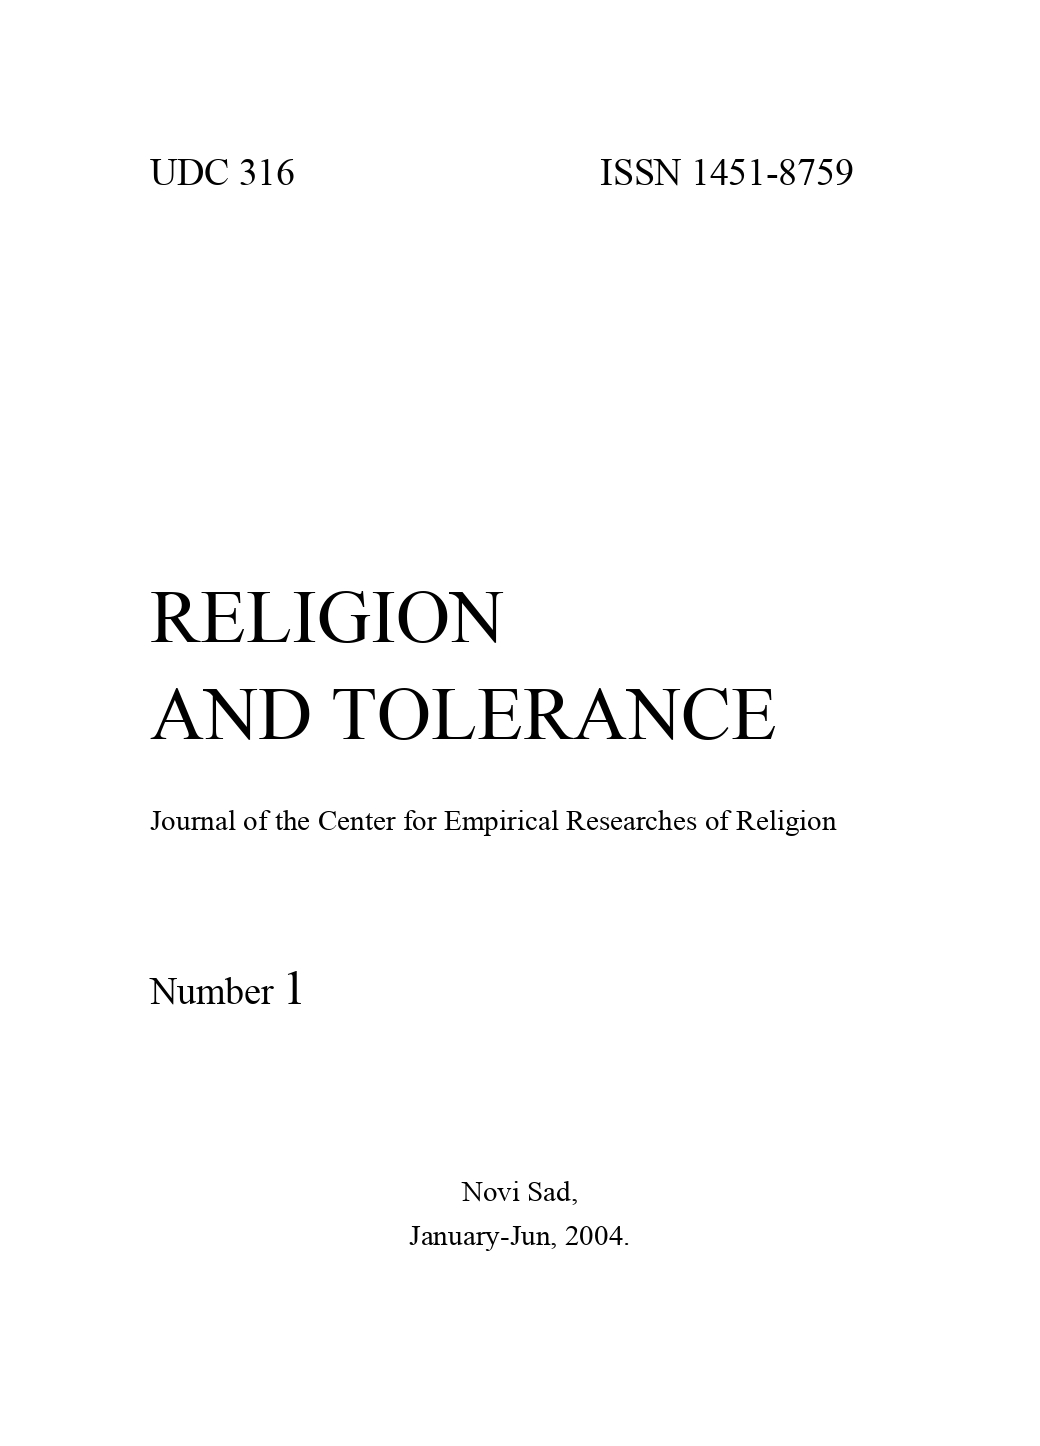 THE YOUNG AND RELIGIOUS TOLERANCE Cover Image